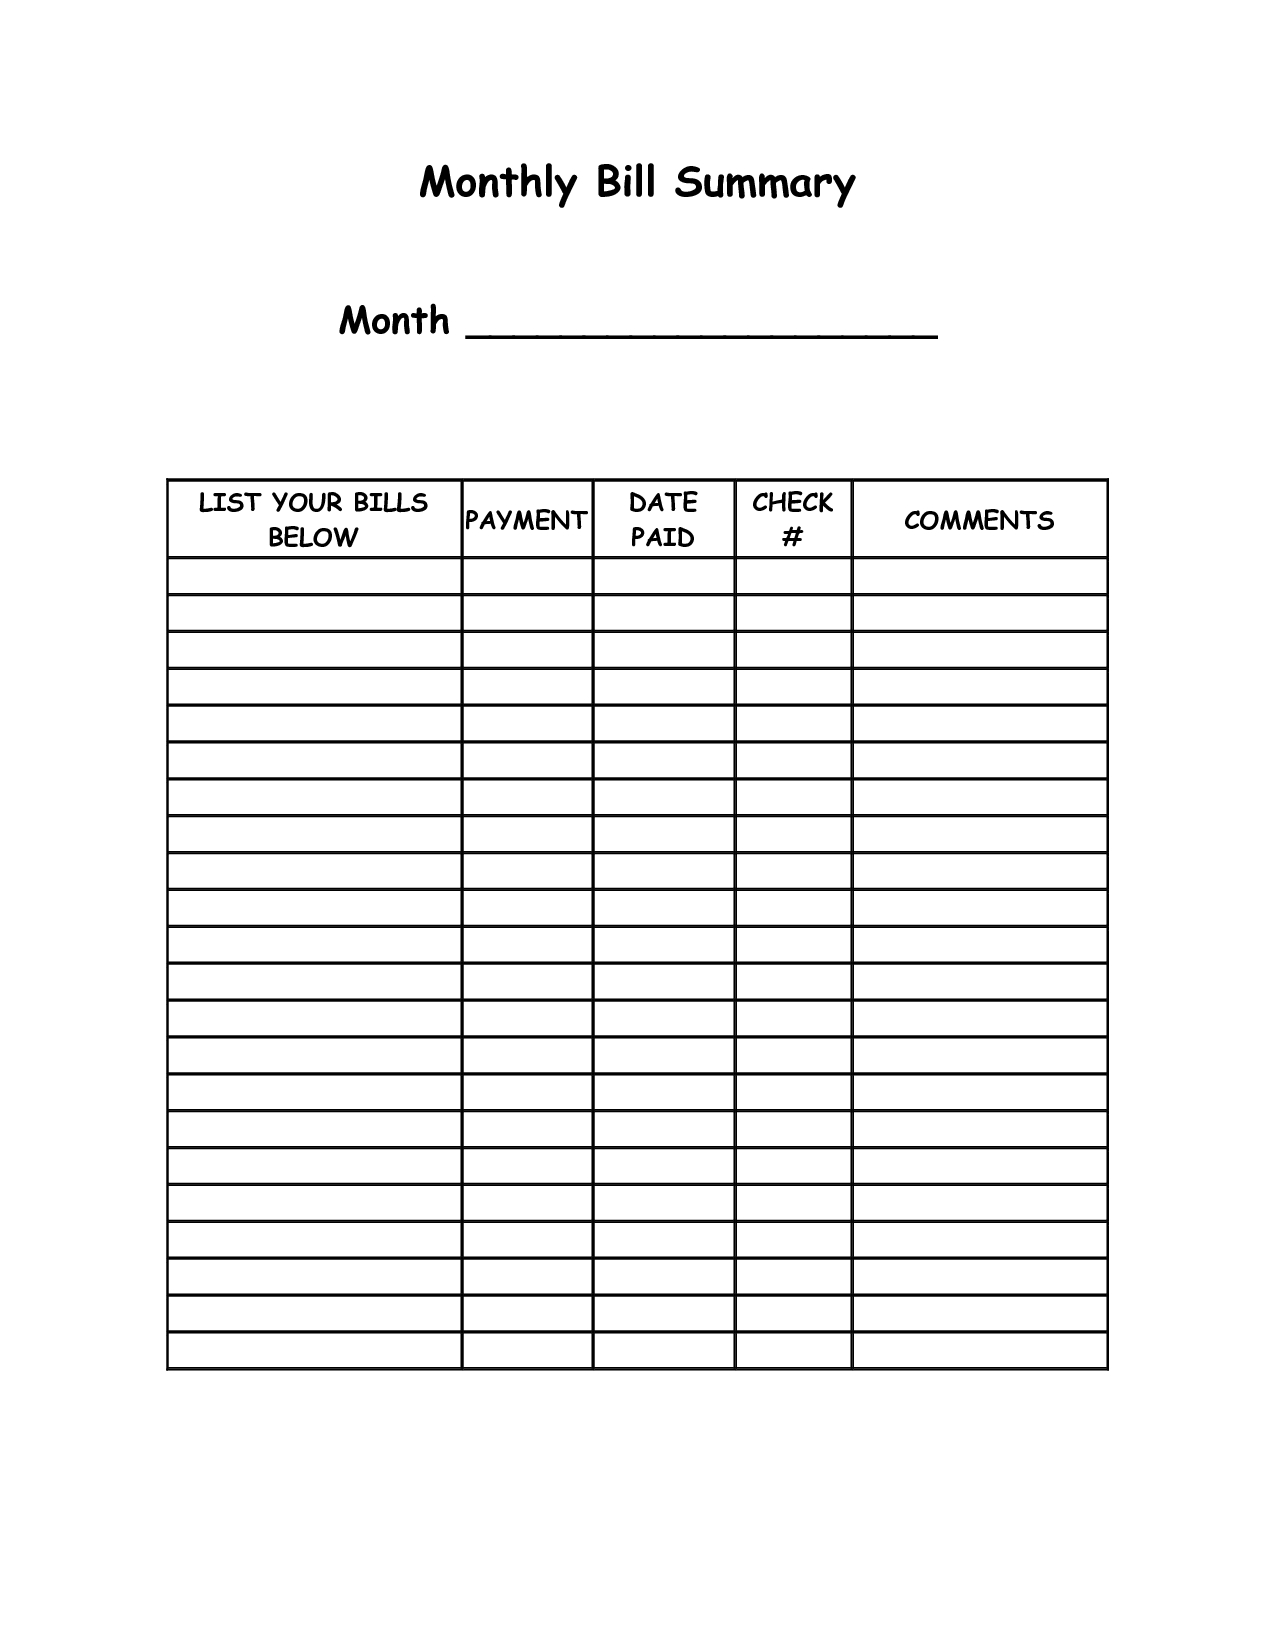 Monthly Bill Summary Doc | Monthly Bill, Organizing Monthly  Bill Payment Worksheet Printable